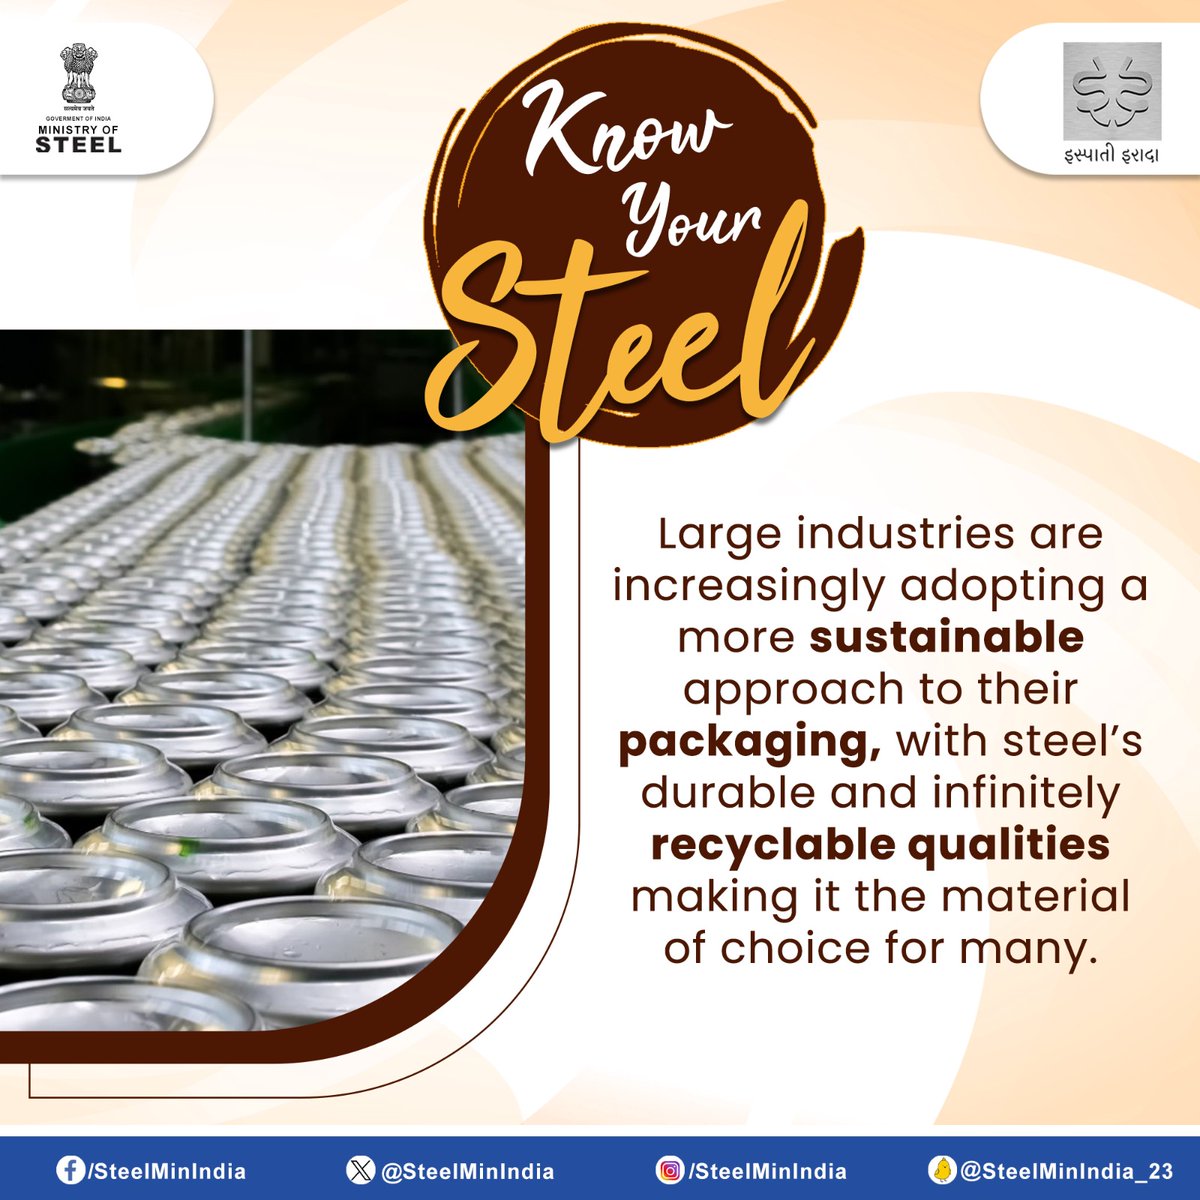 Exploring the fusion of innovation and sustainability within the steel industry. From groundbreaking technologies to eco-conscious practices, steel continues to redefine possibilities while safeguarding our planet's future.💡🌱

#KnowYourSteel #SteelInnovation #SustainableSteel